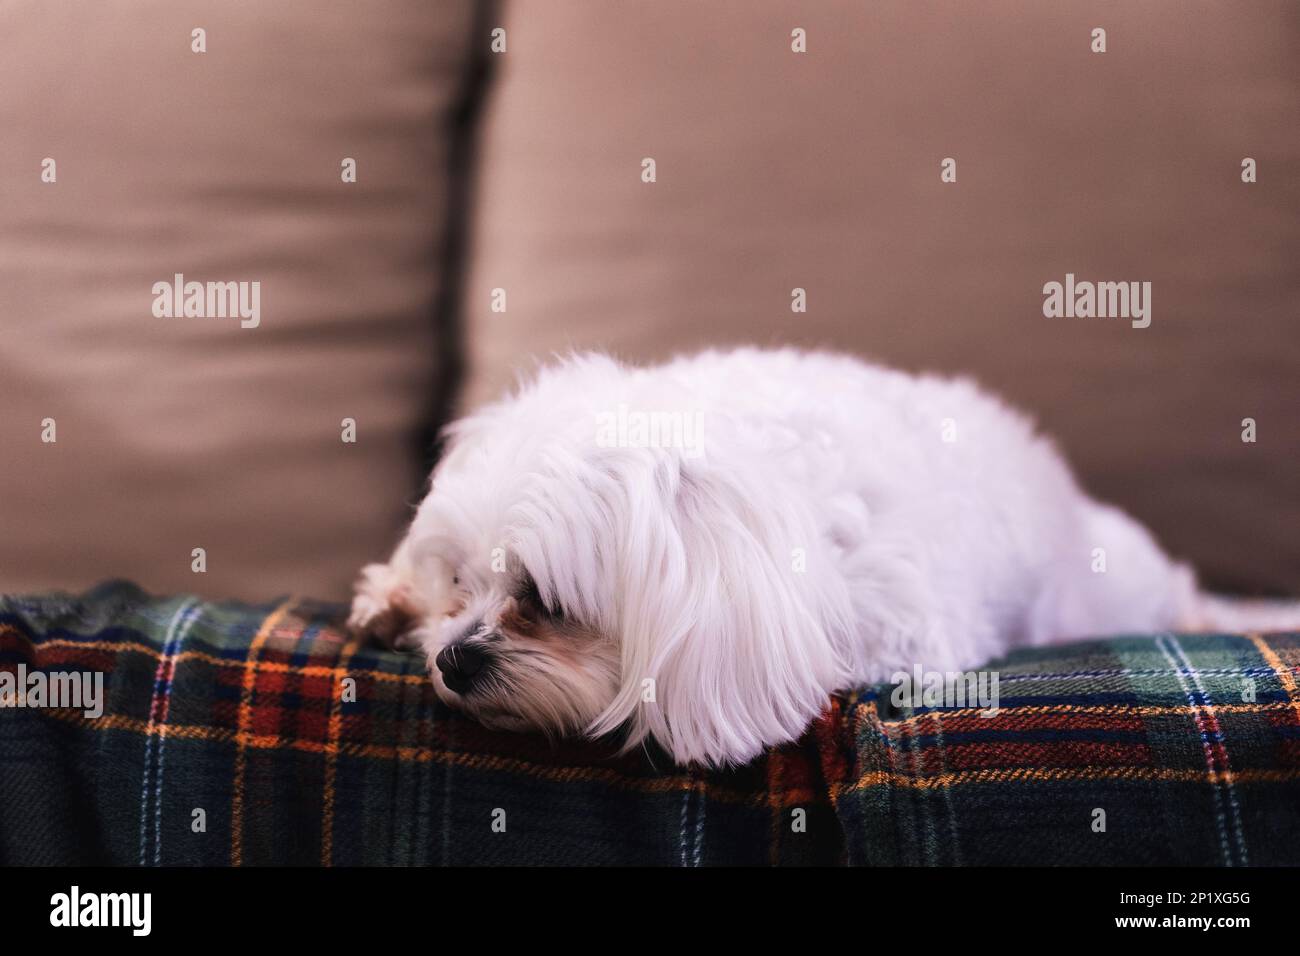 A close up portrait of a small white cute boomer dog lying down on a couch on a cosy blanket. The domestic animal is barely awake, but is still lookin Stock Photo